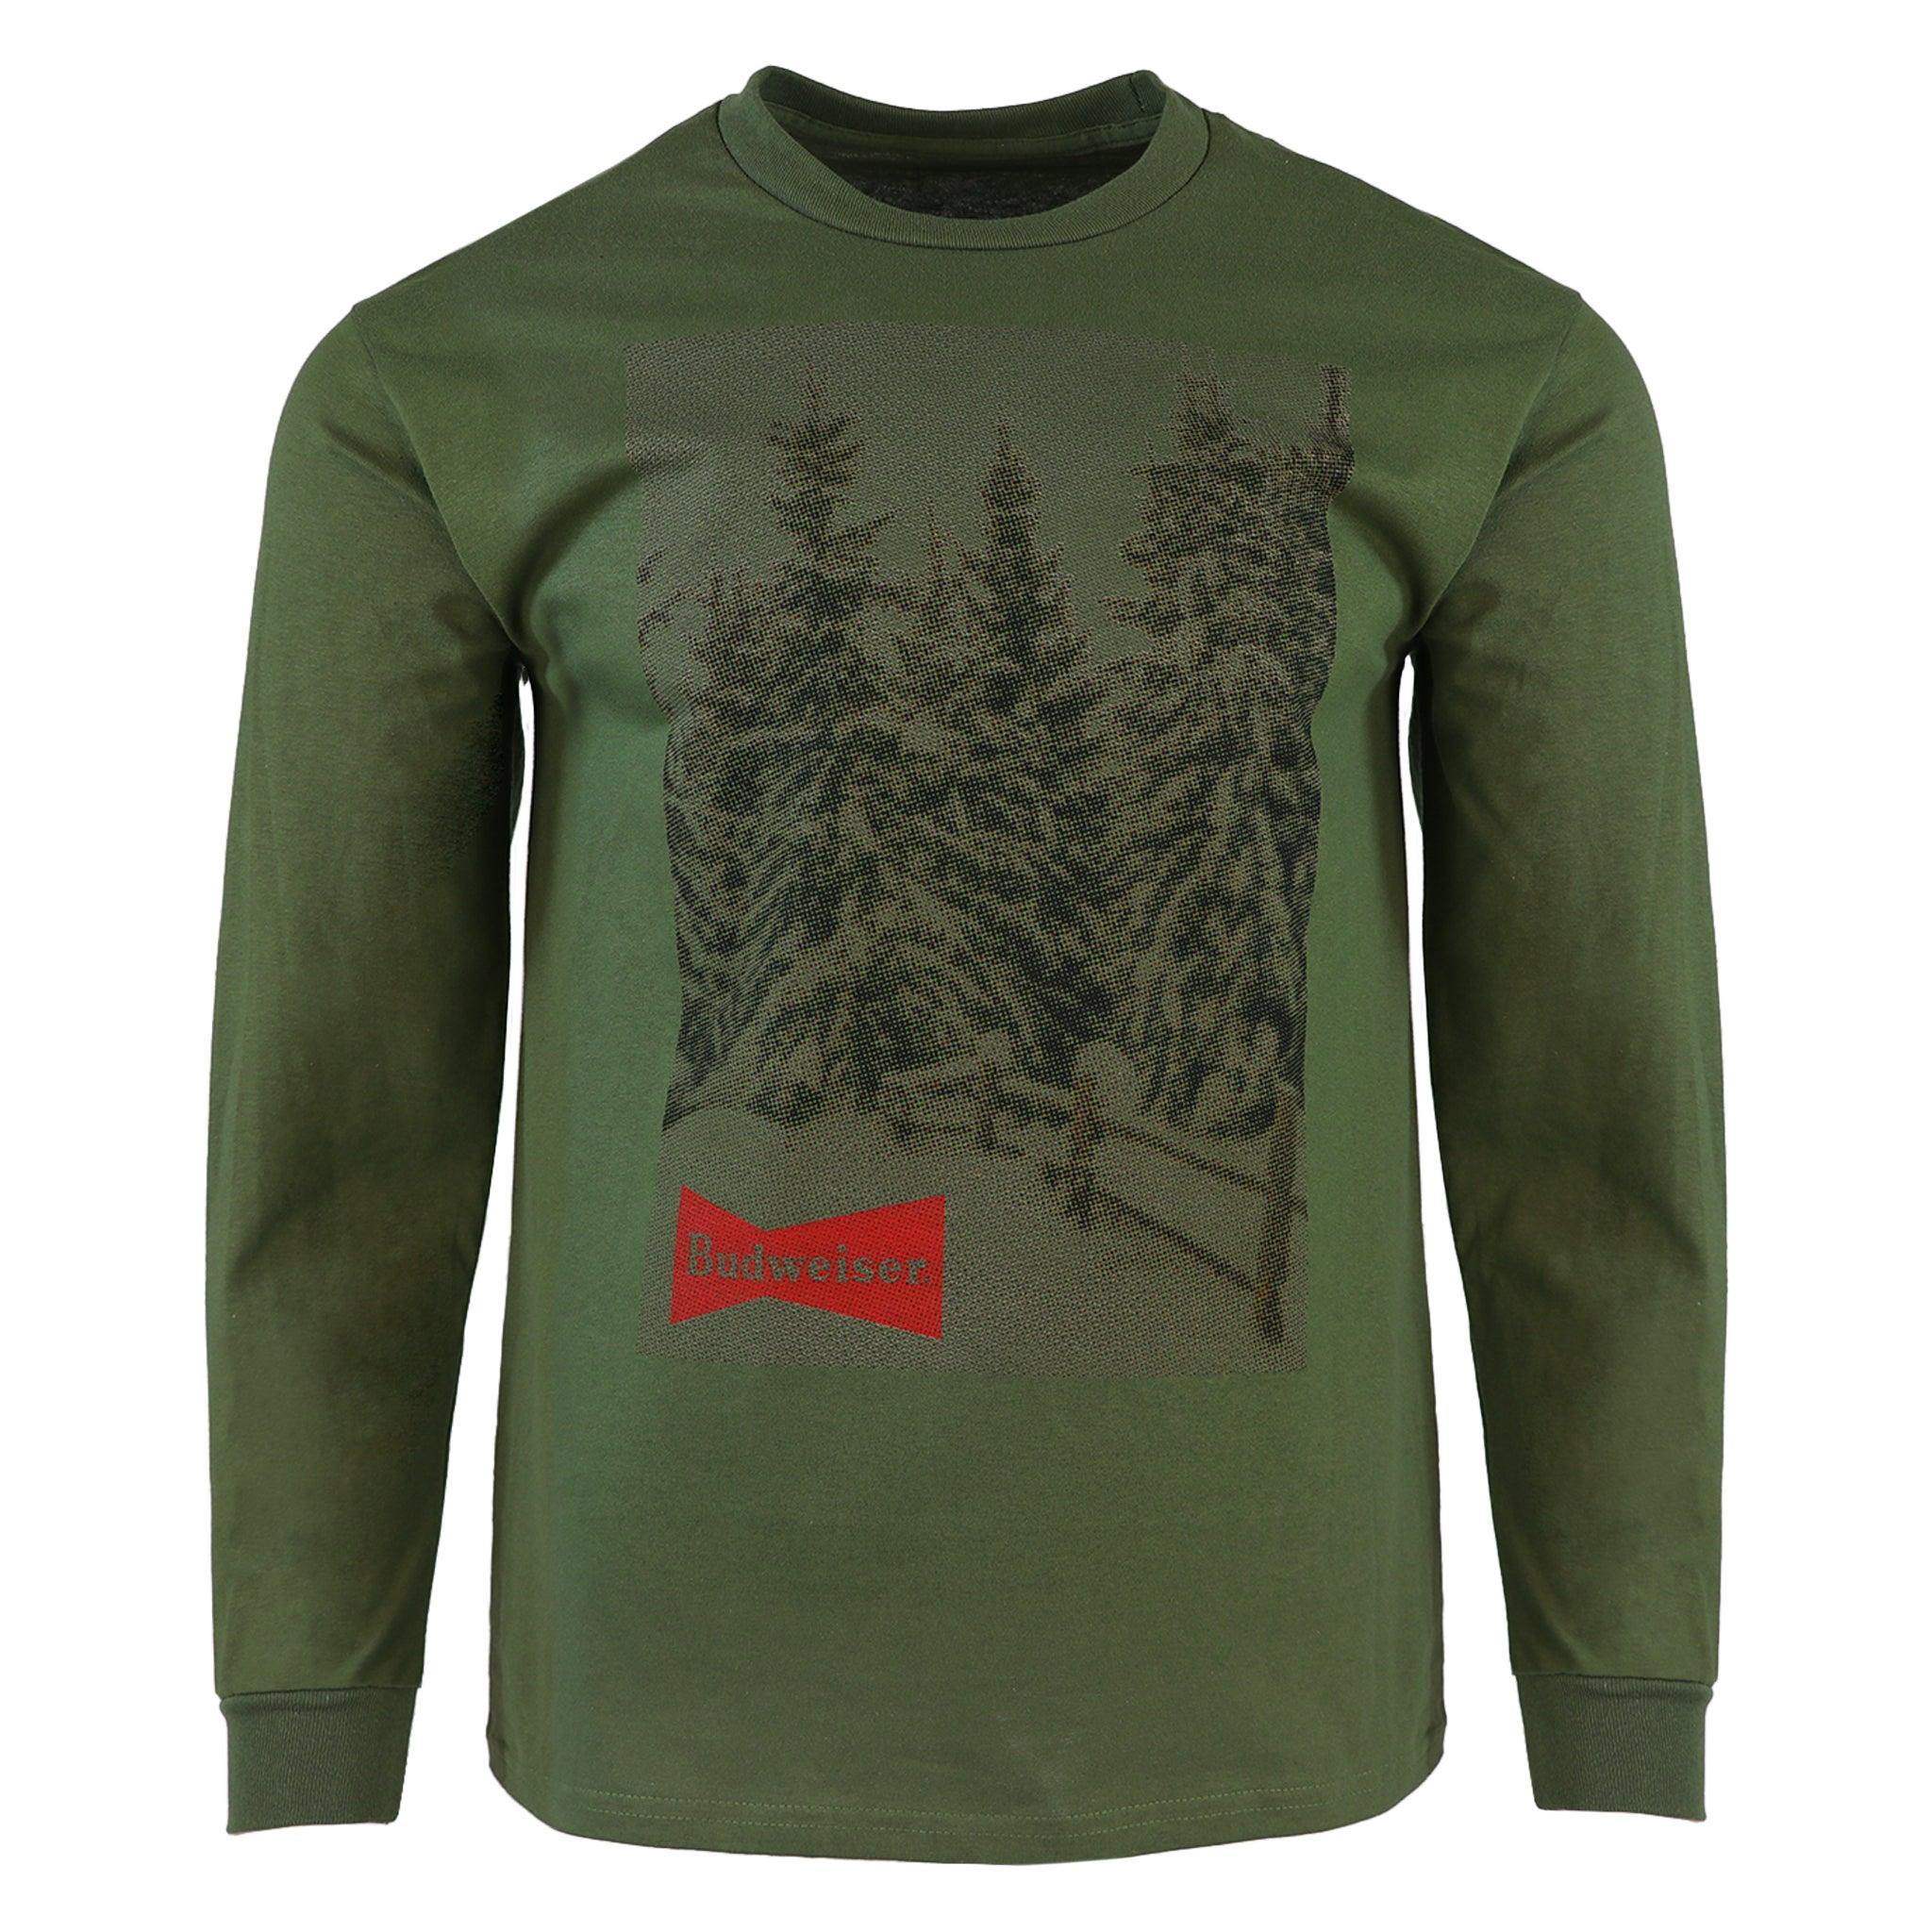 Olive green long sleeve Budweiser shirt. Features tonal snowy pine trees with Budweiser bowtie 